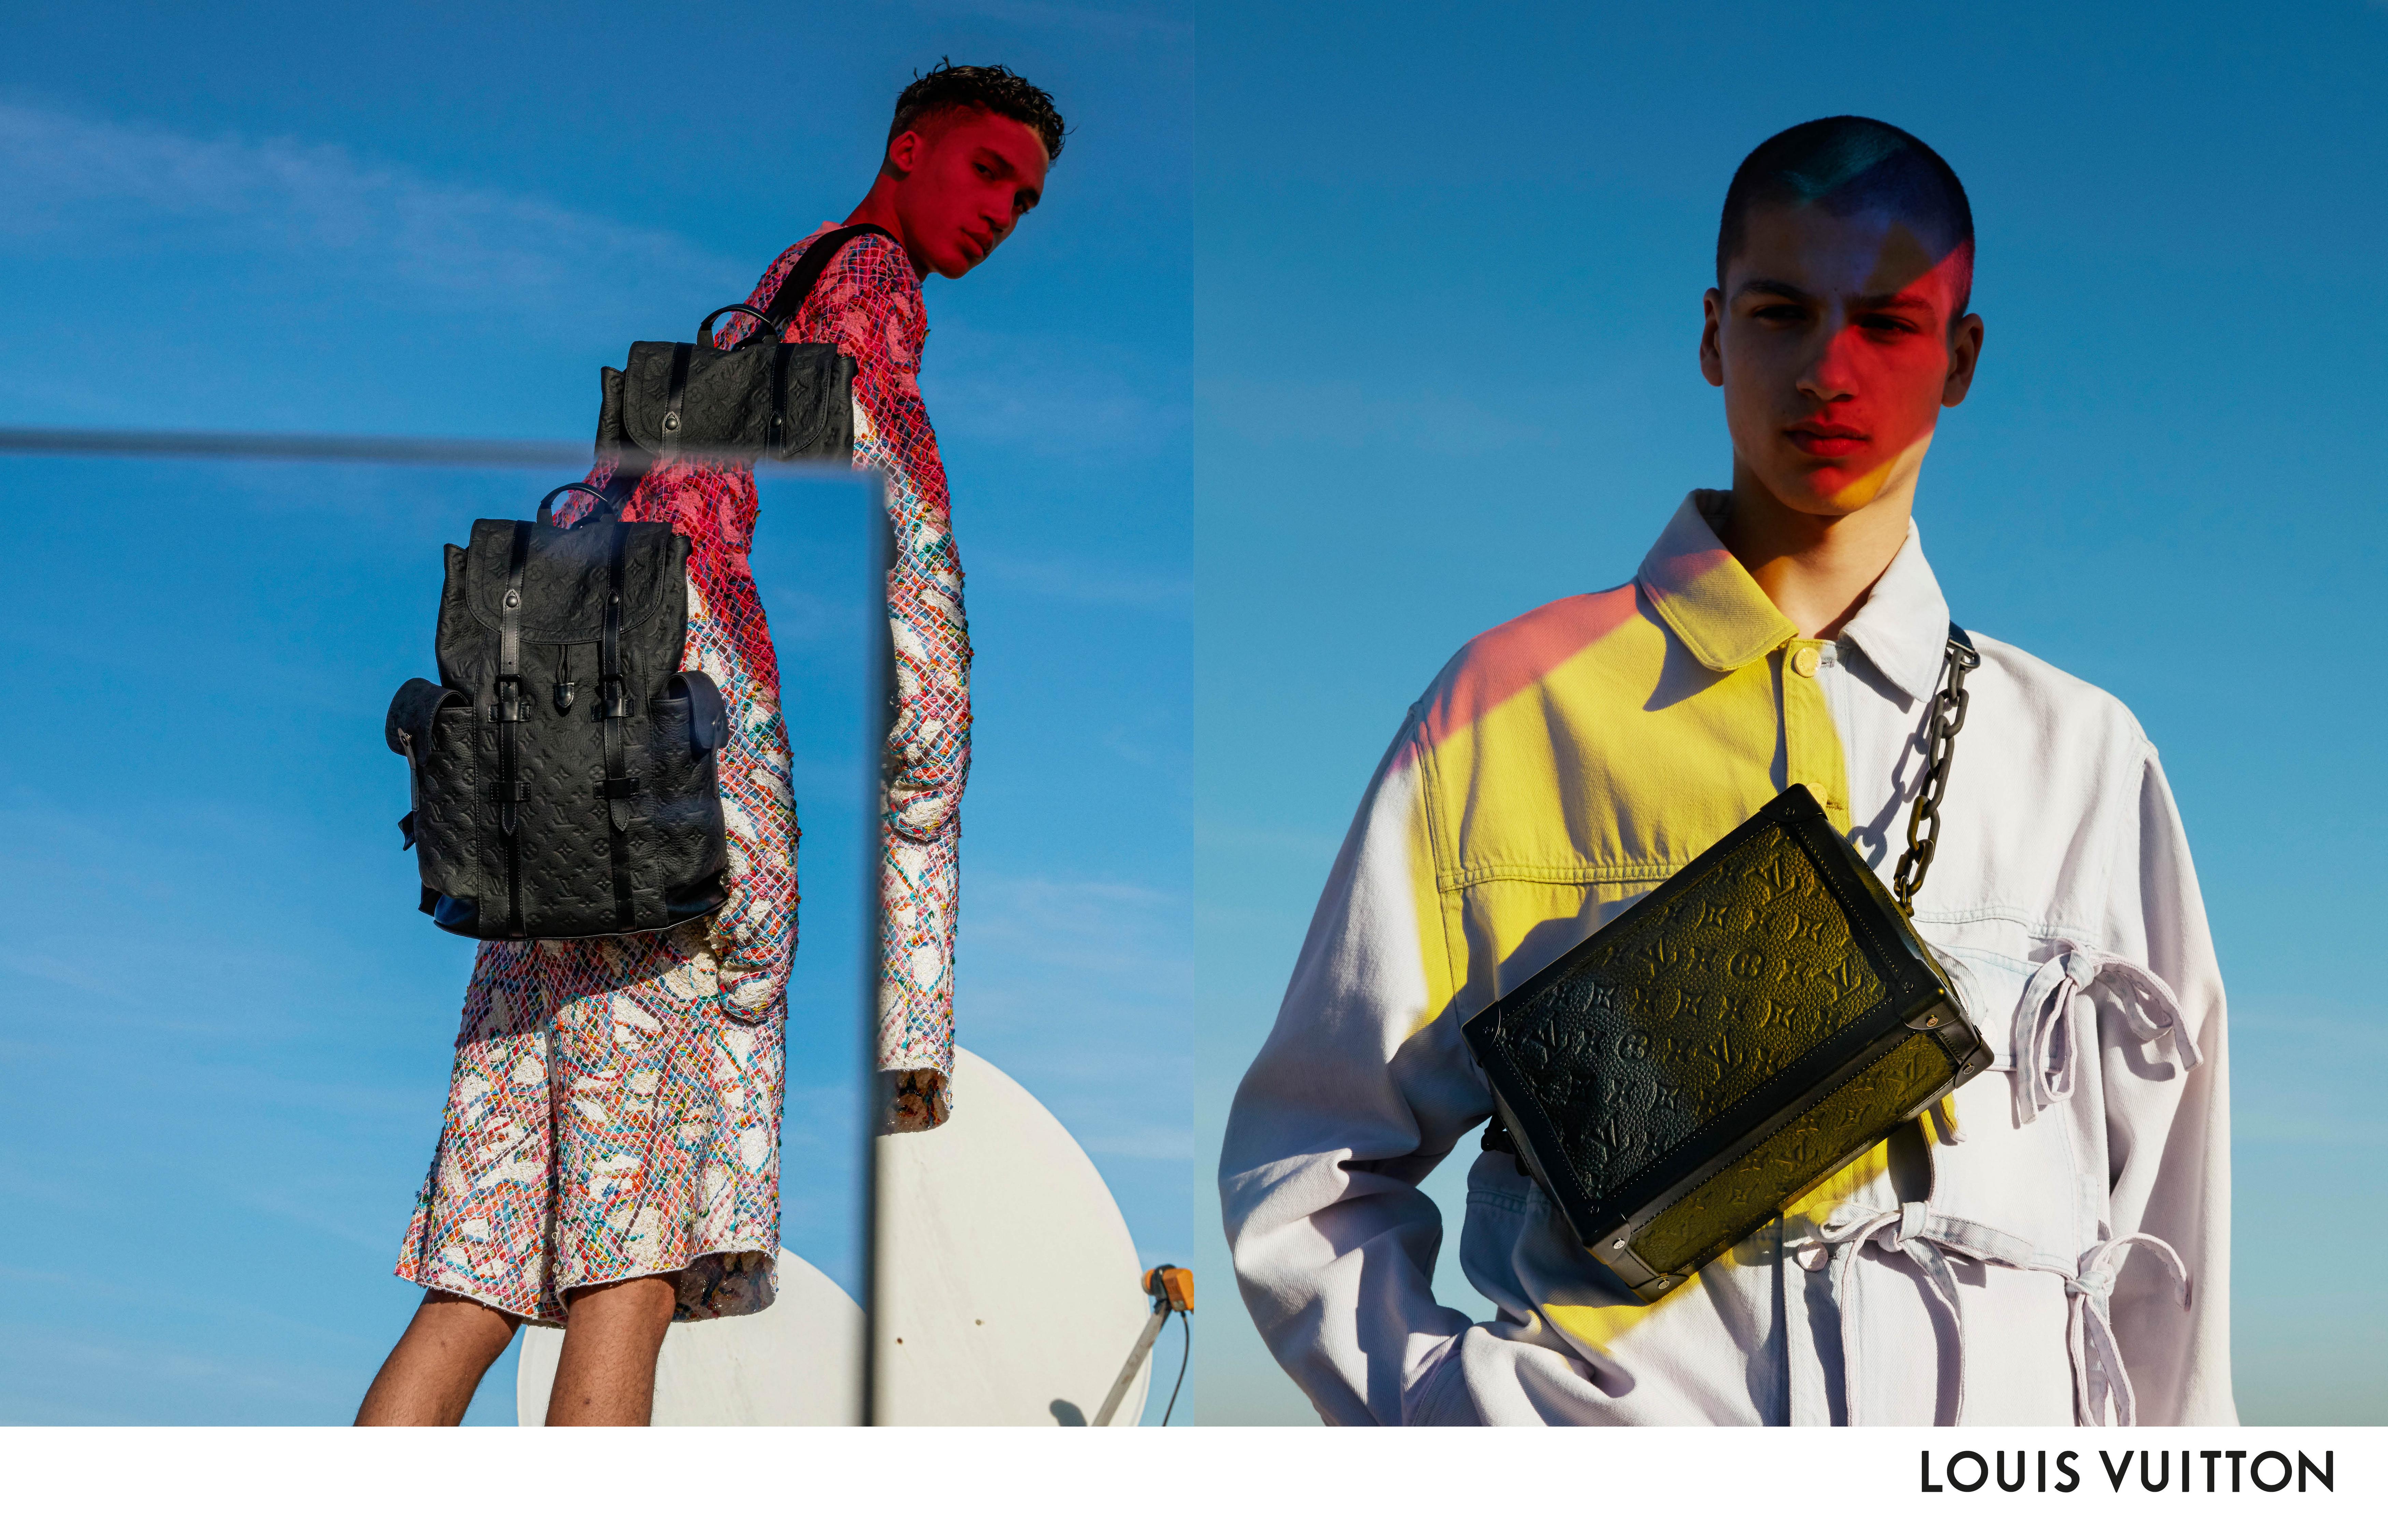 Louis Vuitton's FW19 collection lands in South Africa. – @GoTrendSA